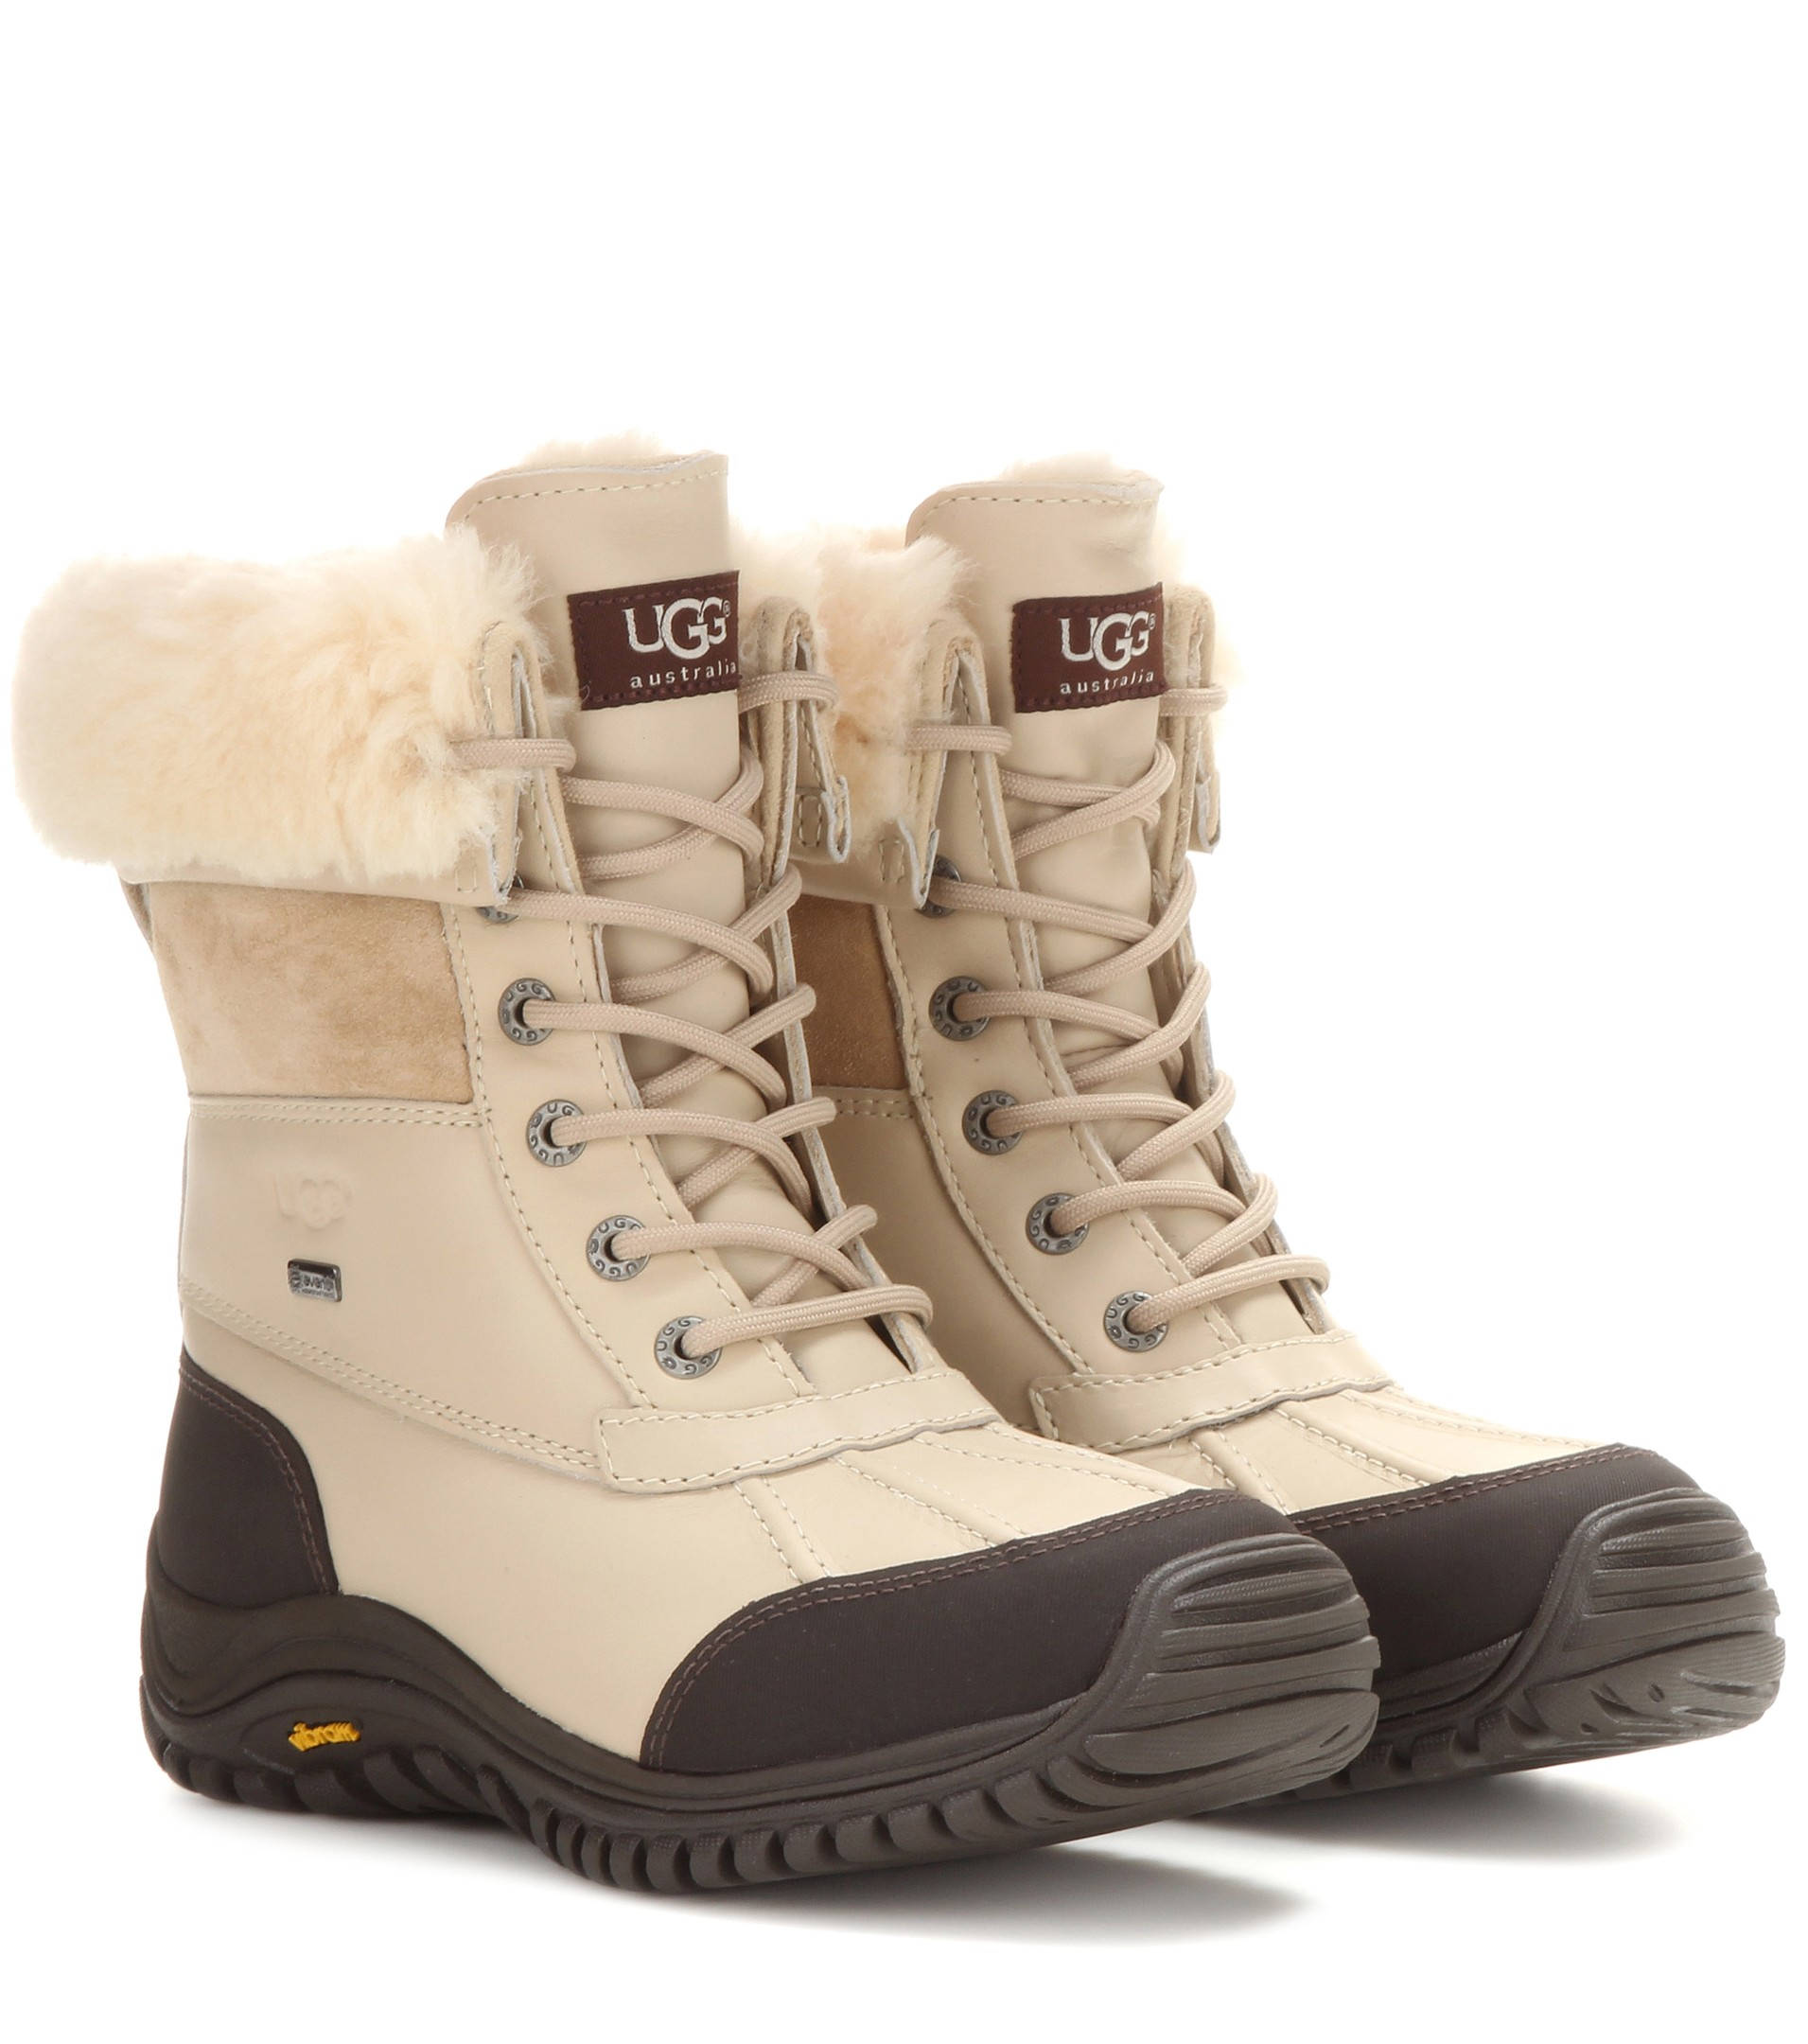 UGG Adirondack Ii Shearling-lined Leather Boots in Natural - Lyst